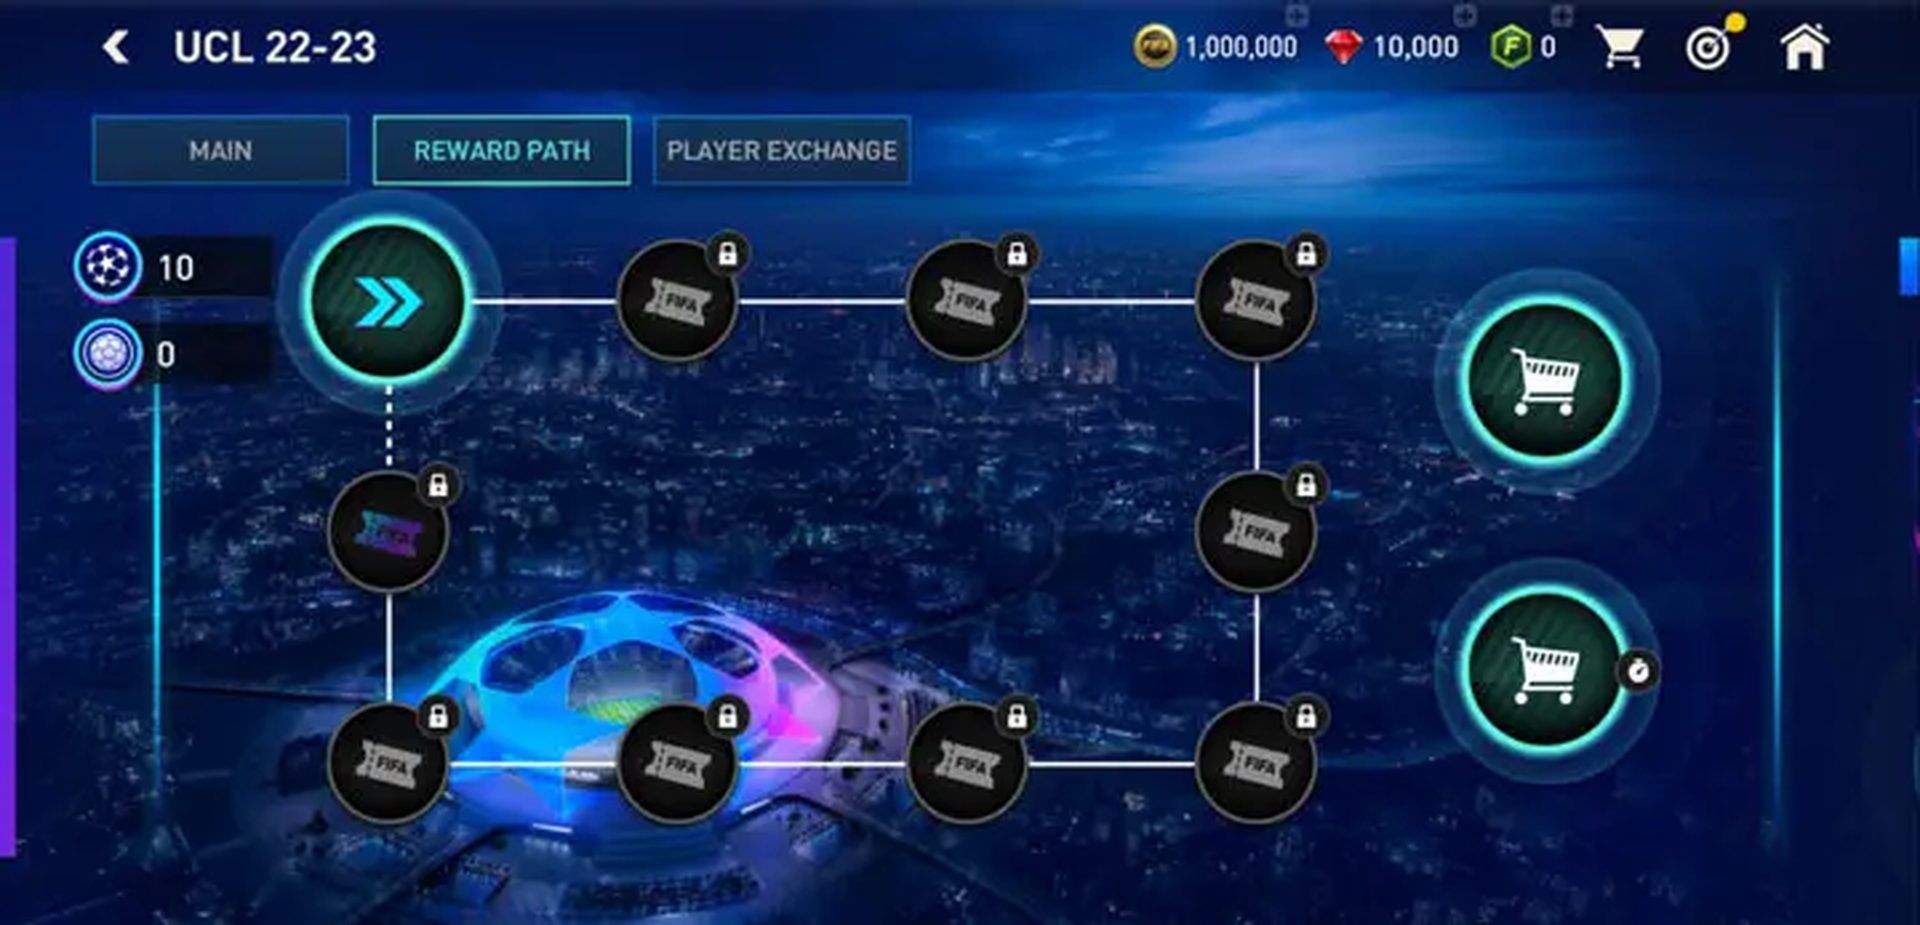 How to get UCL tokens in FIFA mobile?